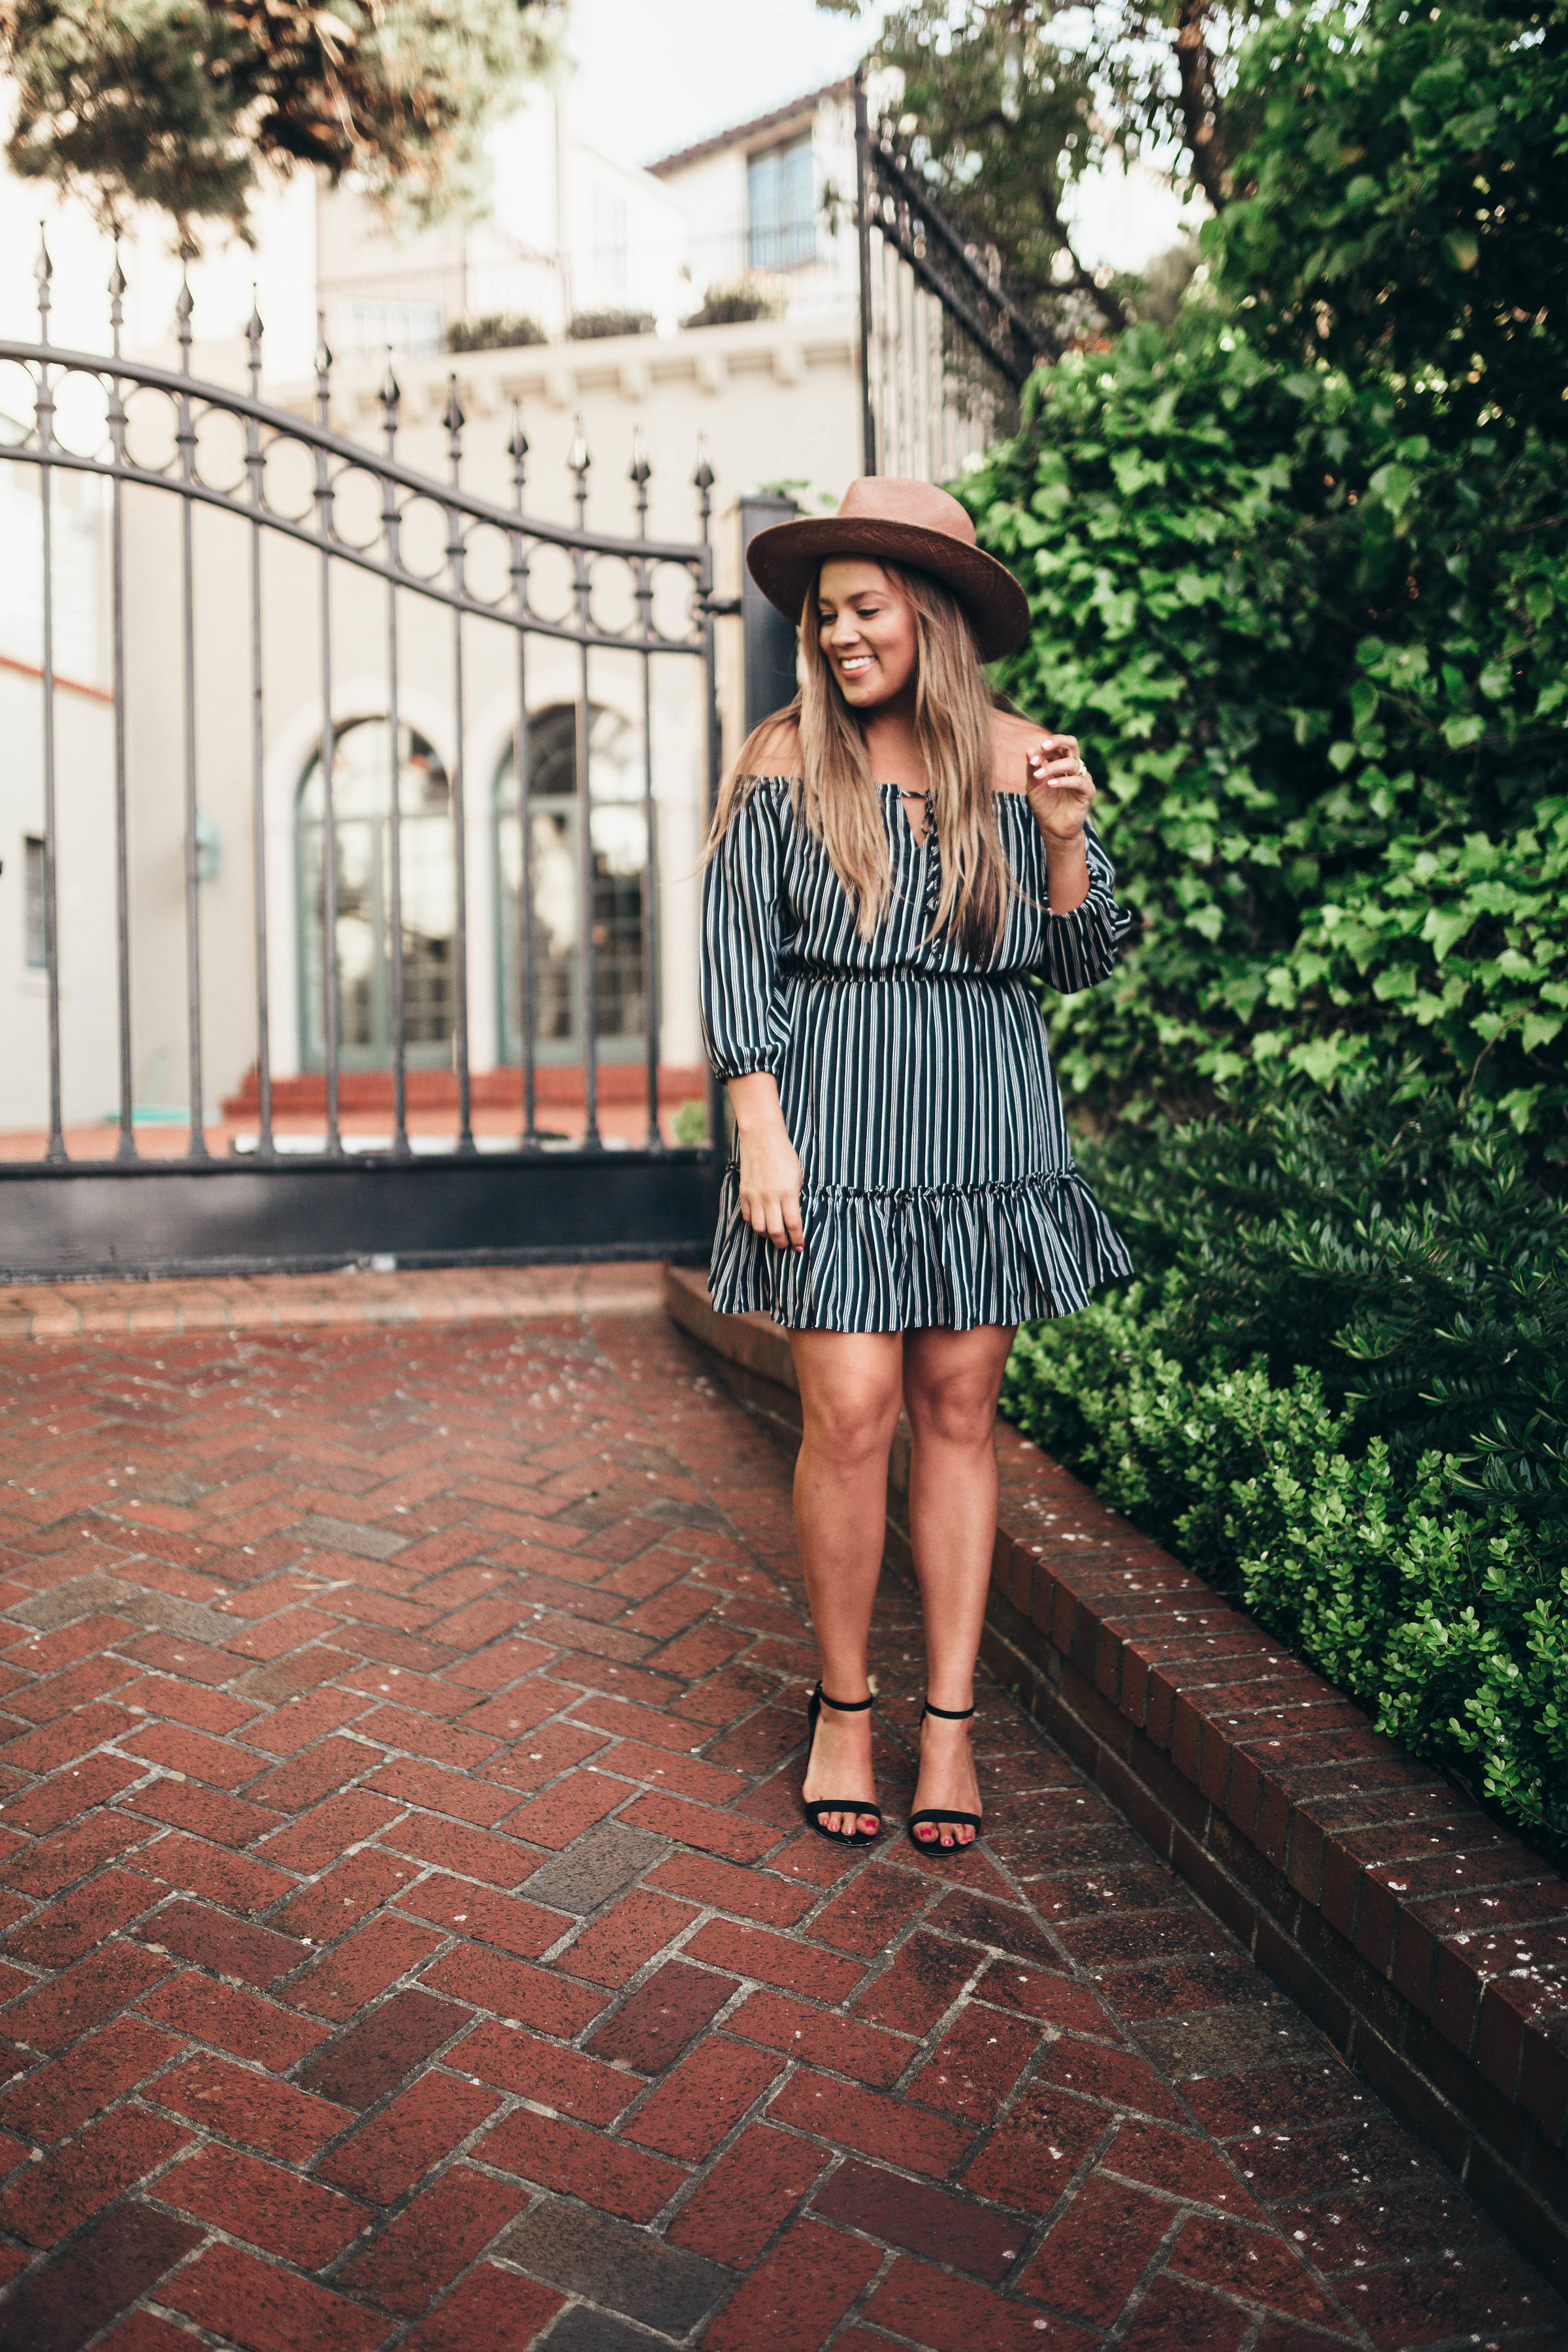 Ashley Zeal from Two Peas in a Prada shares her outfits that she is packing for the Reward Style Conference held in Dallas, TX. 